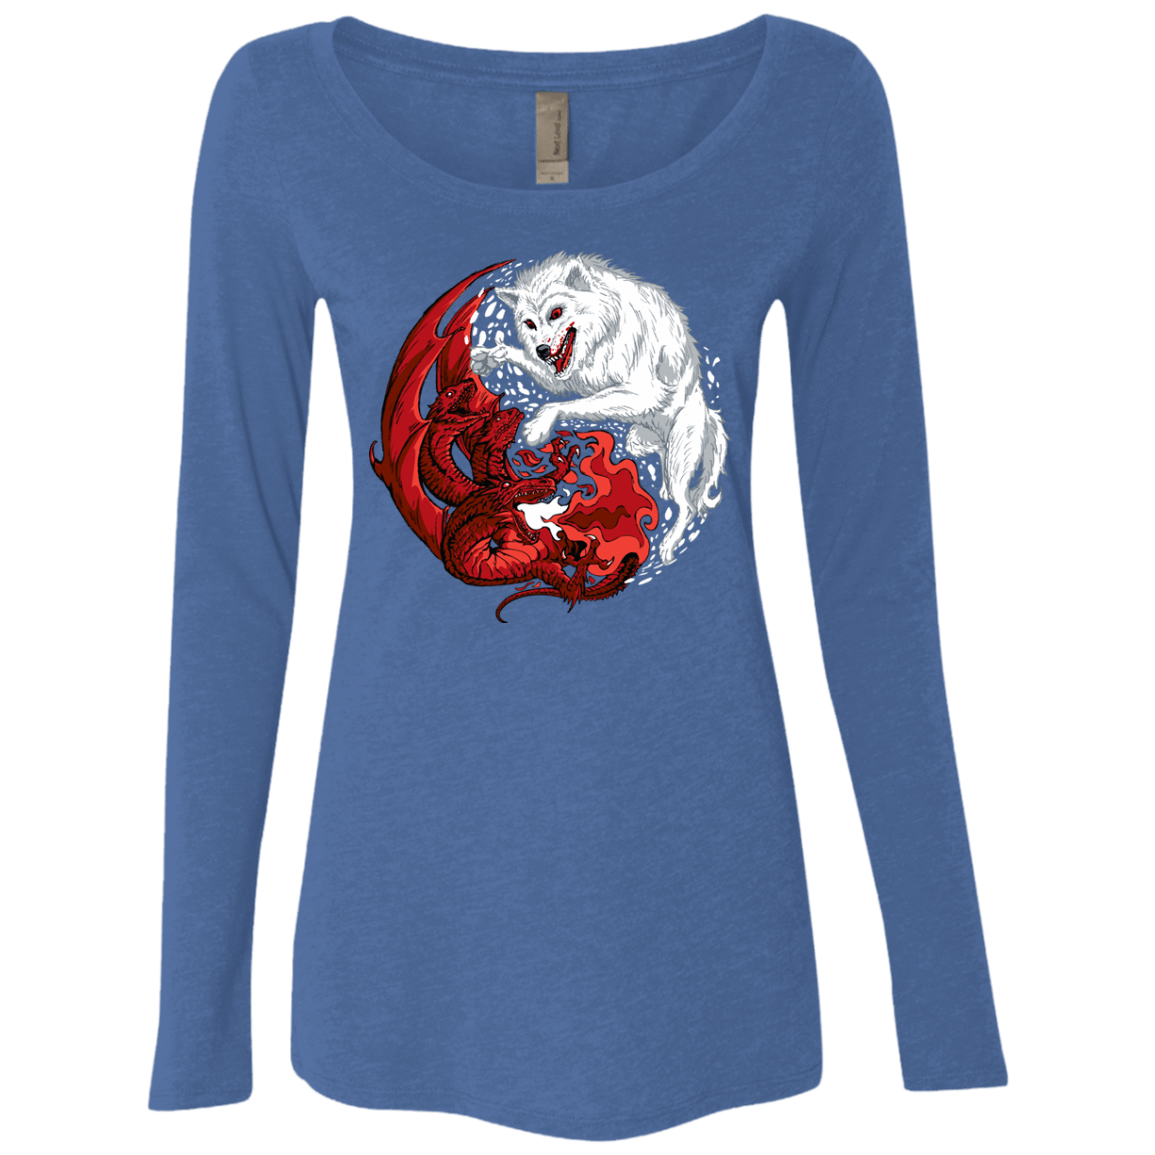 T-Shirts Vintage Royal / Small Ice and Fire Women's Triblend Long Sleeve Shirt